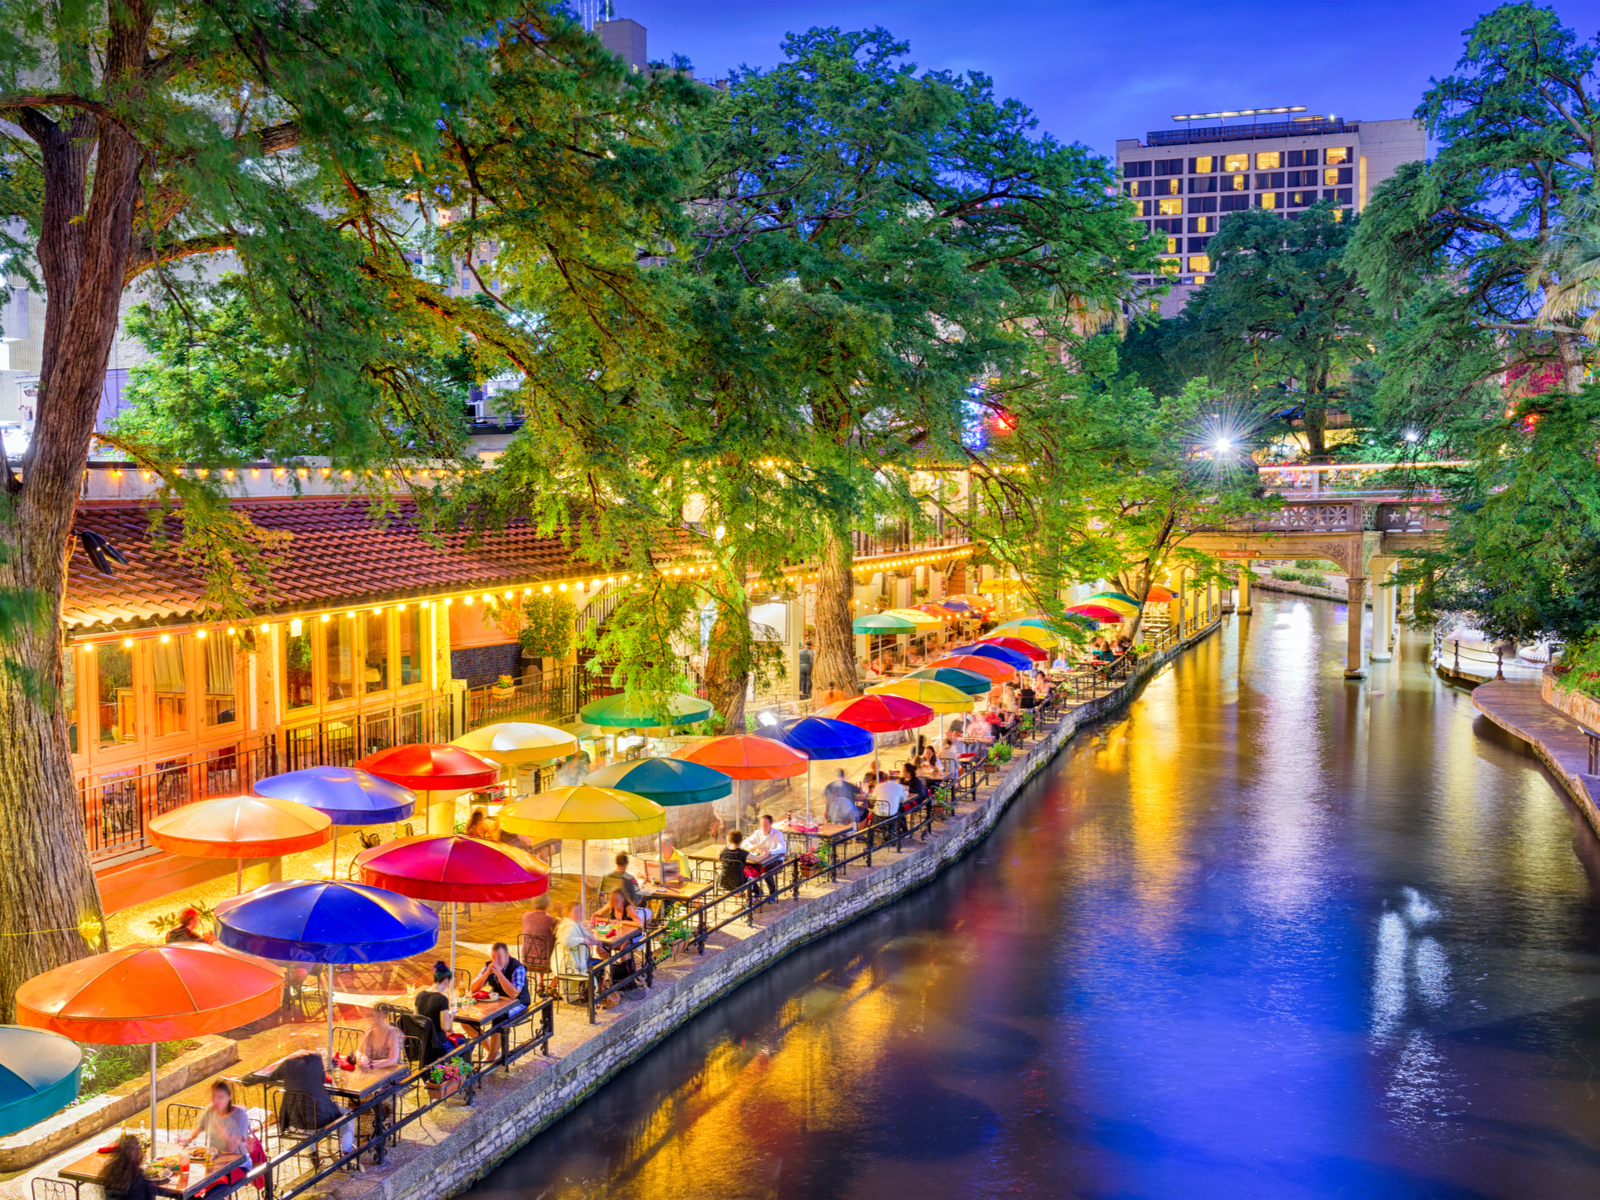 Walk San Antonio’s River Walk, one of the best things to do in Texas